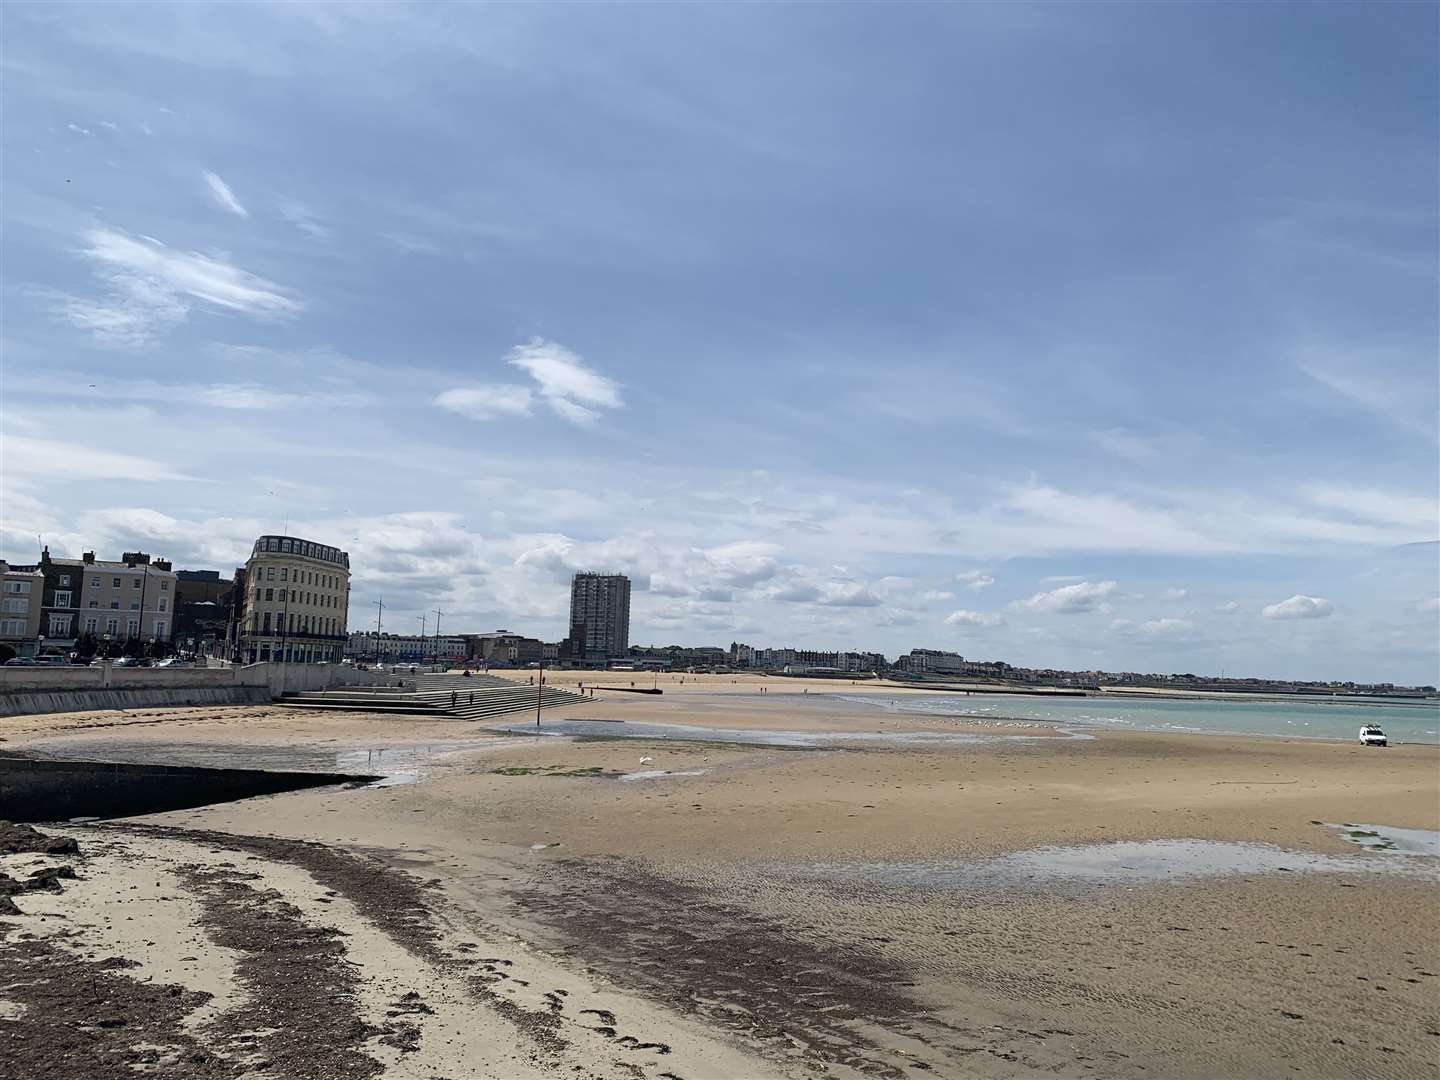 Margate Main Sands is one of the beaches affected by a "unscreened wastewater release" by Southern Water. Stock image